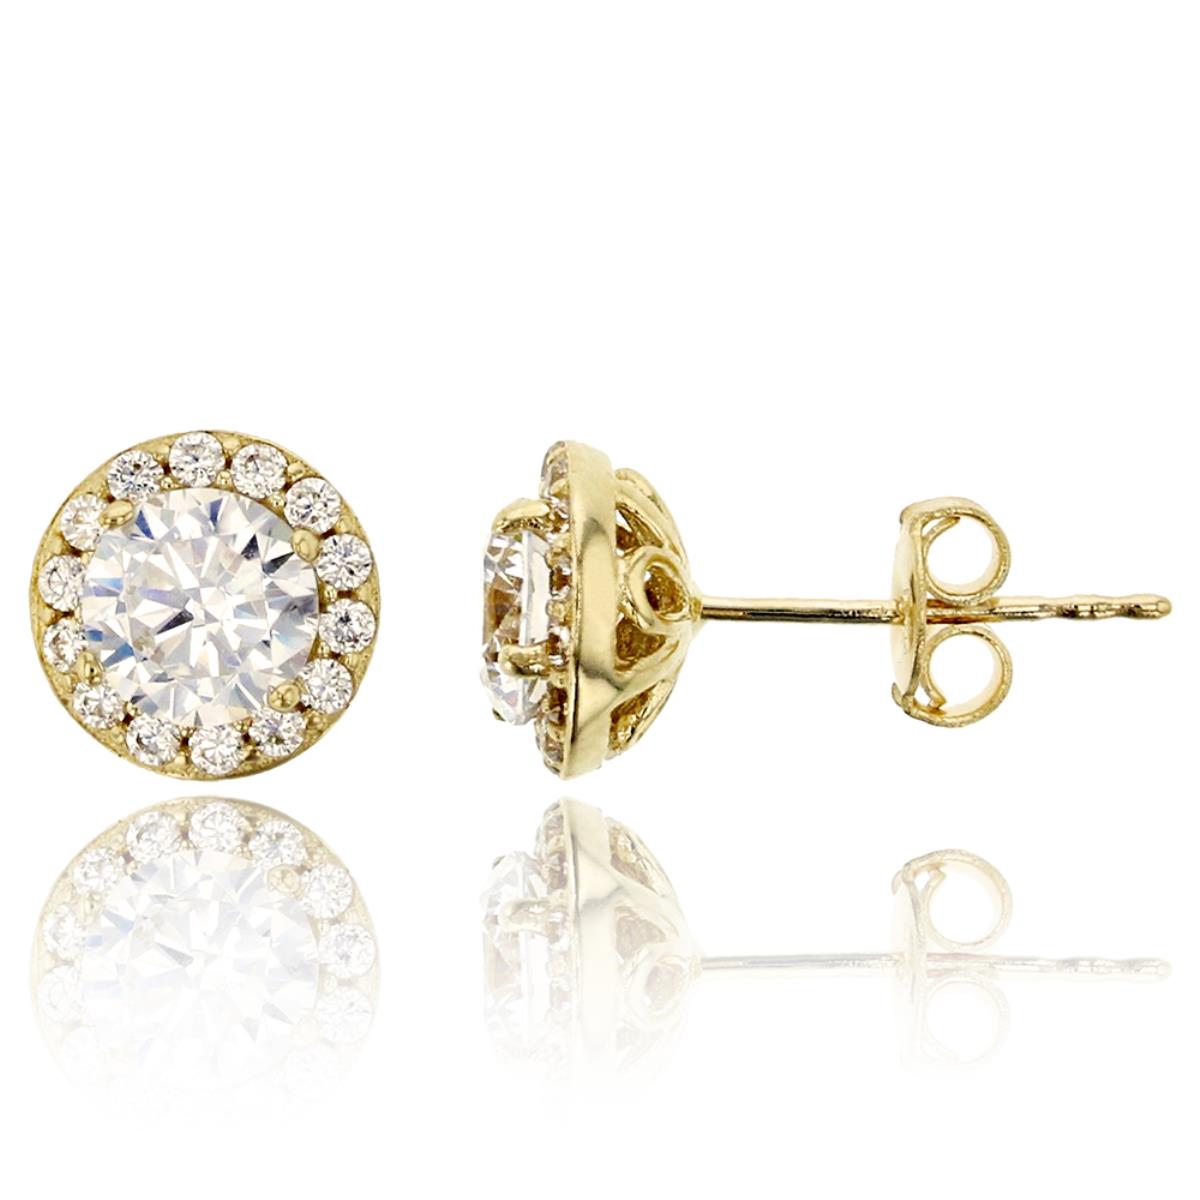 14K Yellow Gold Micropave 5.00mm Round Cut CZ Halo Stud Earrings with Push Backs